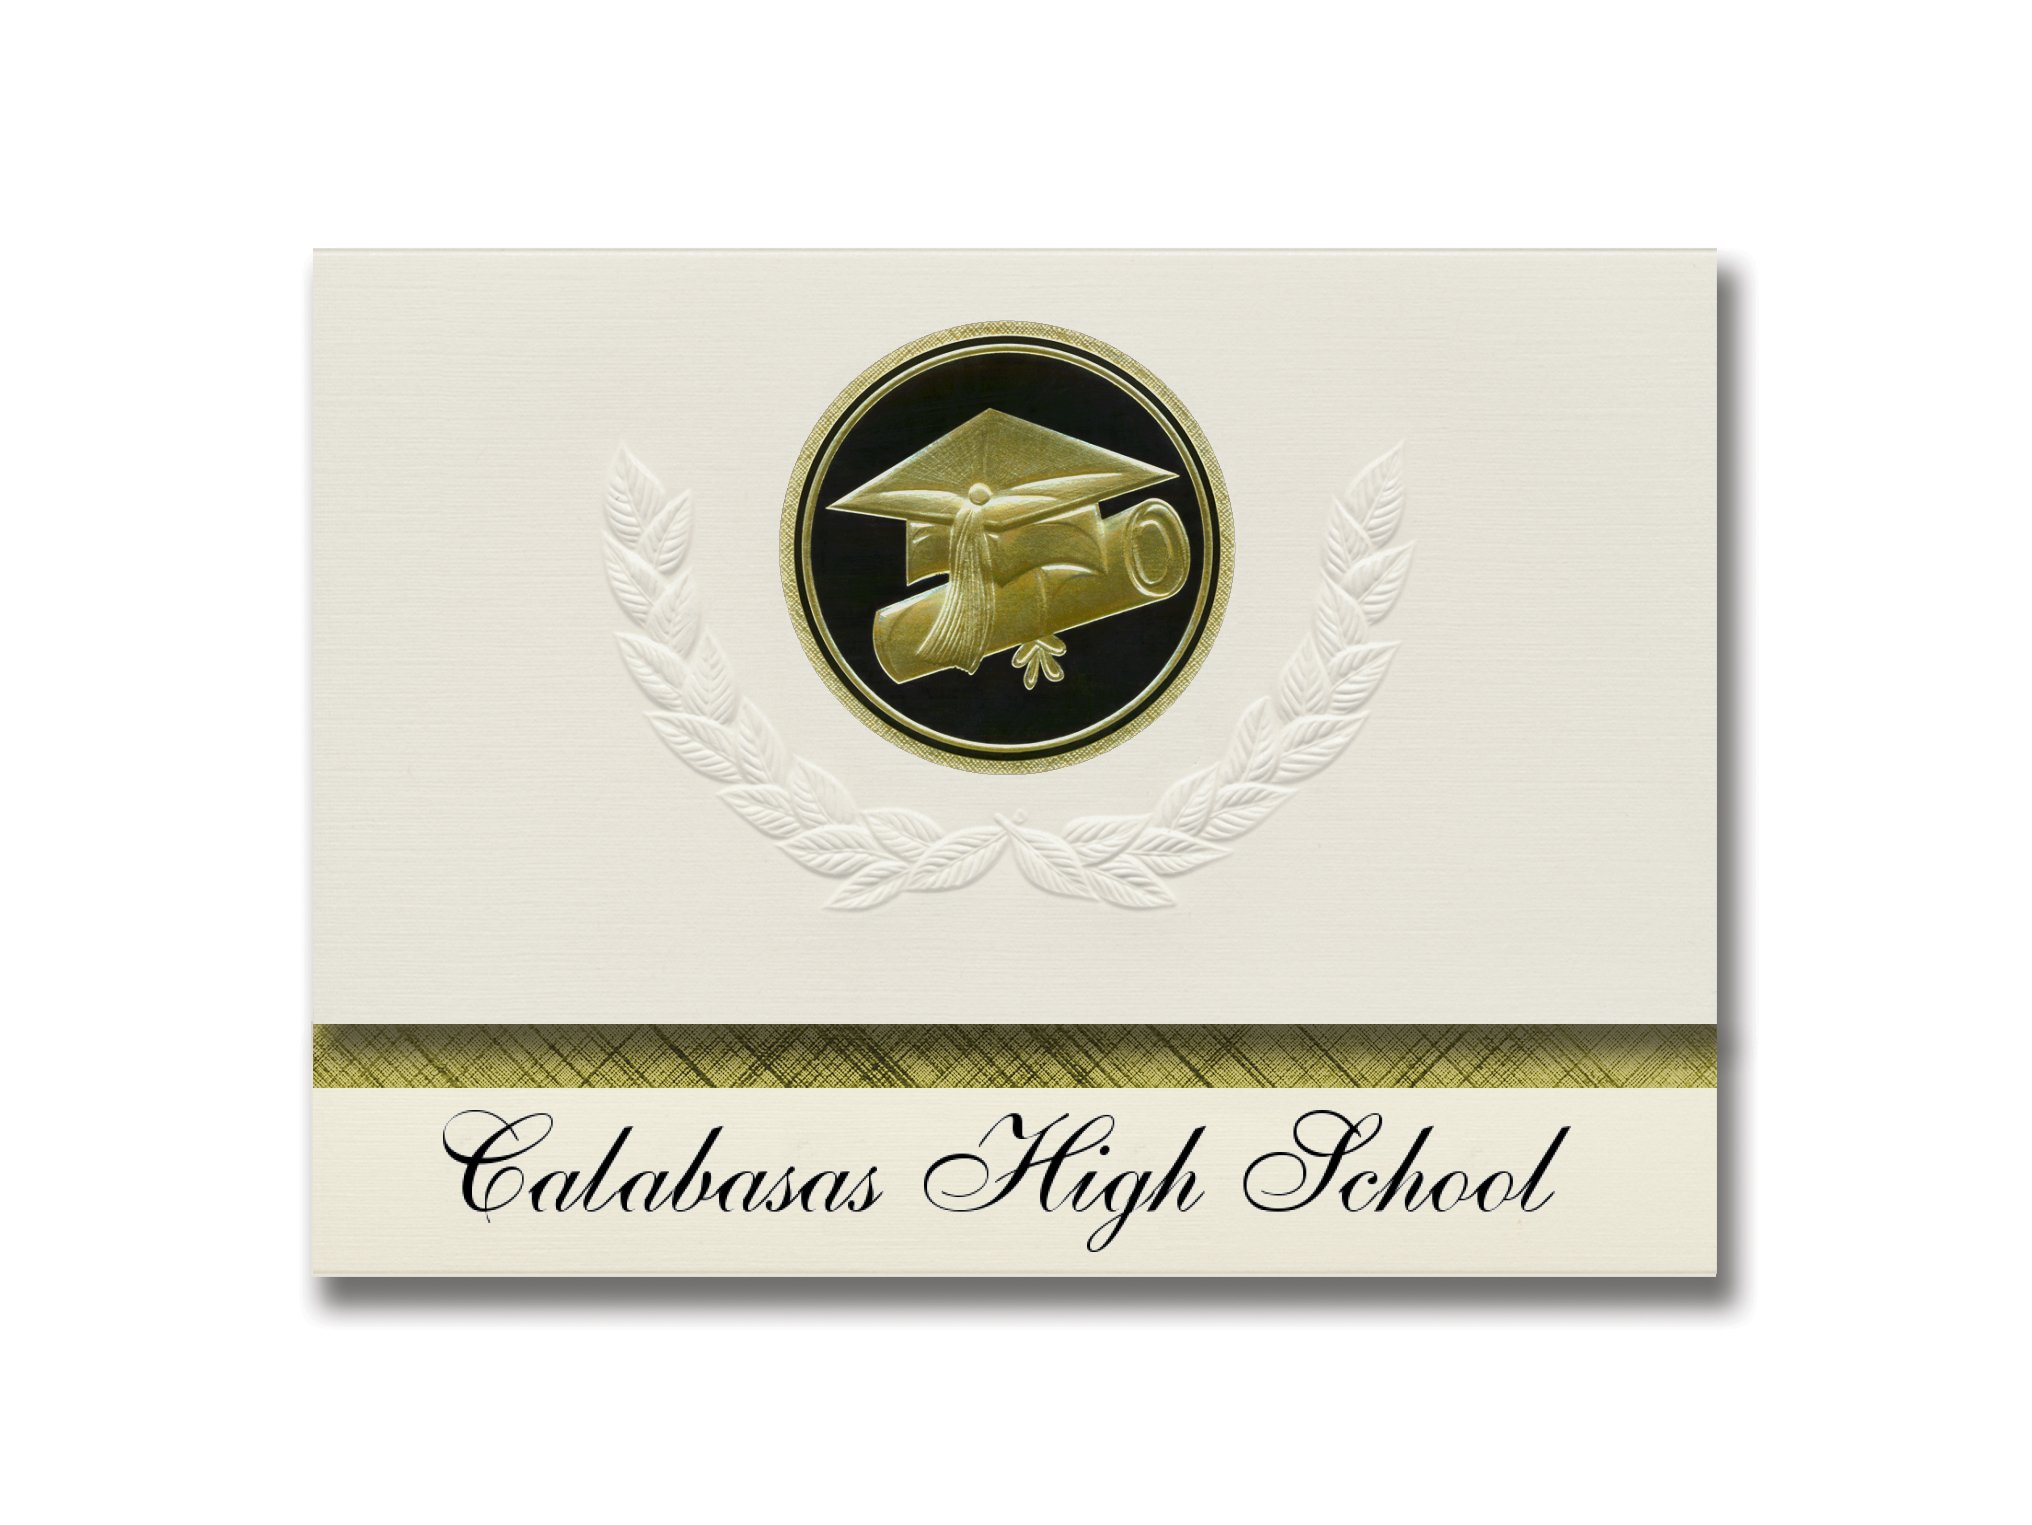 Signature Announcements Calabasas High School (Calabasas, CA) Graduation Announcements, Presidential style, Elite package of 25 Cap & Diploma Seal....